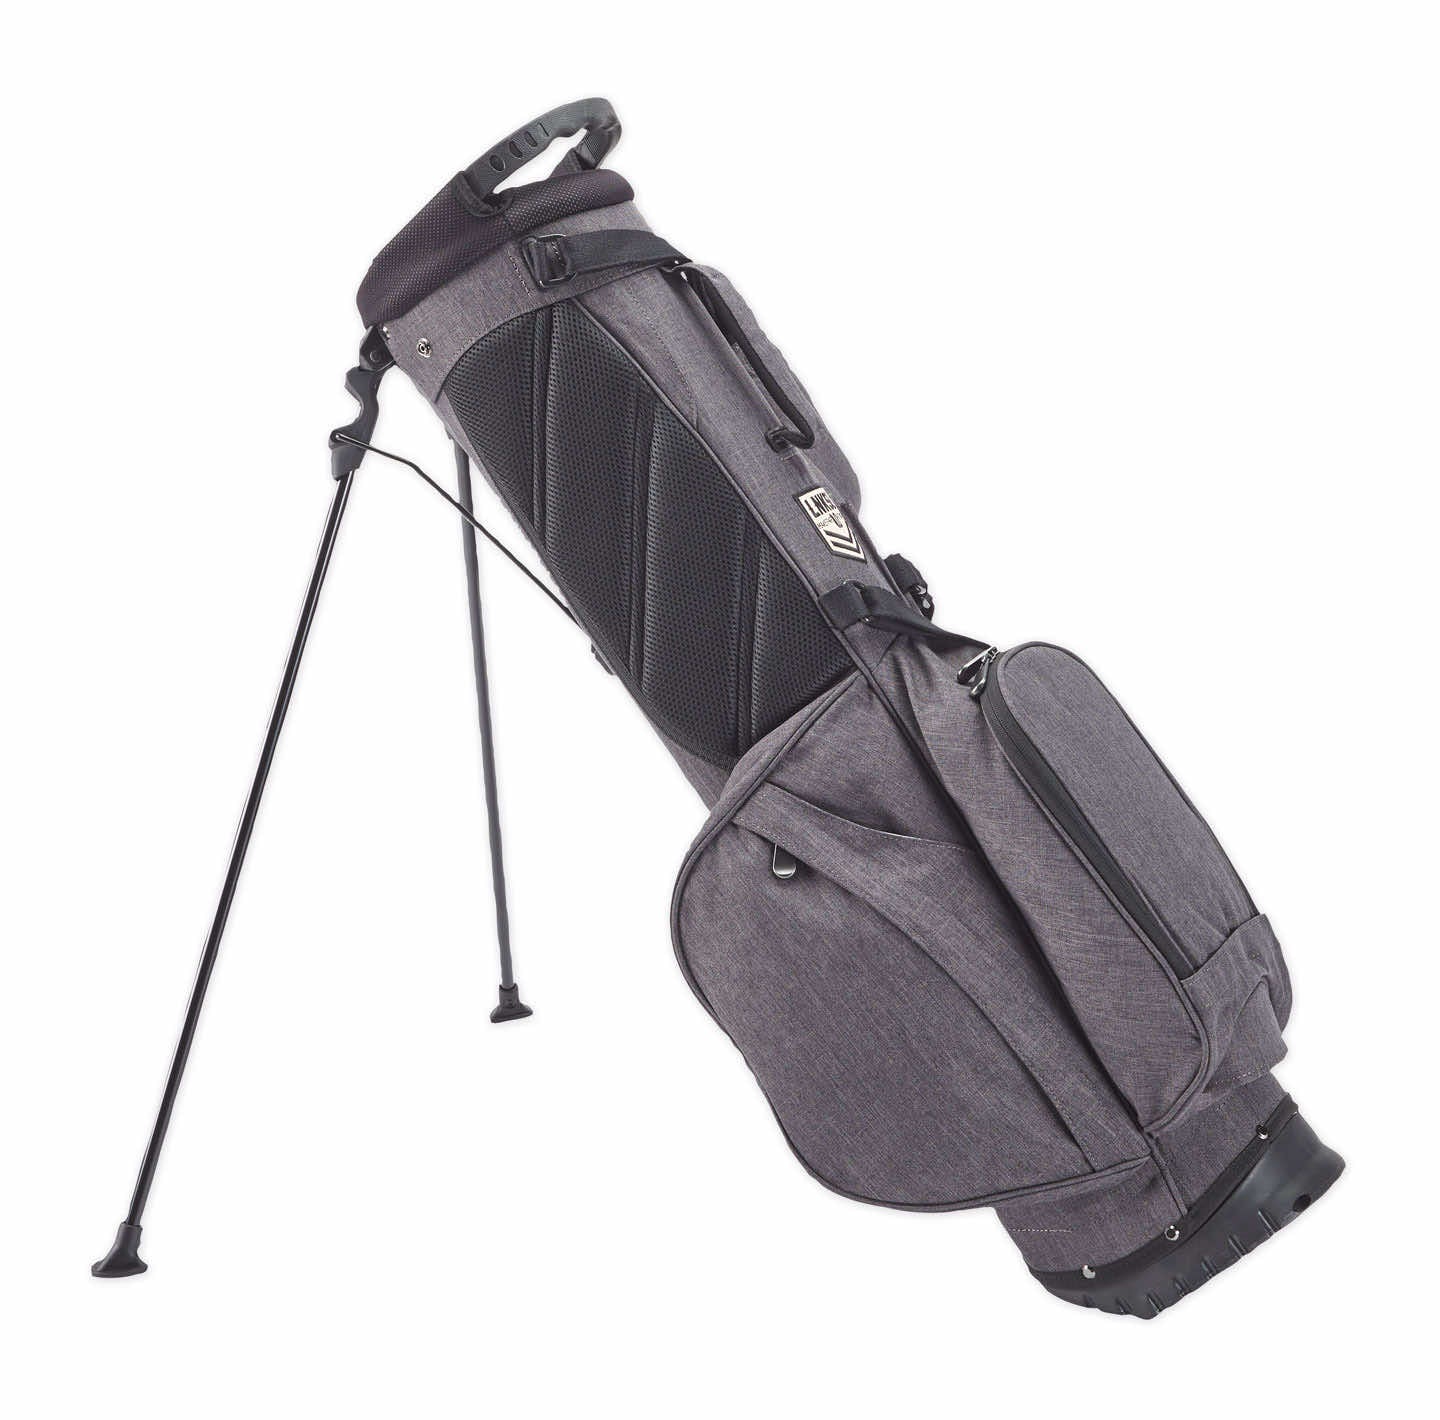 I WISH I HAD KNOWN about this Golf Cart Bag? 